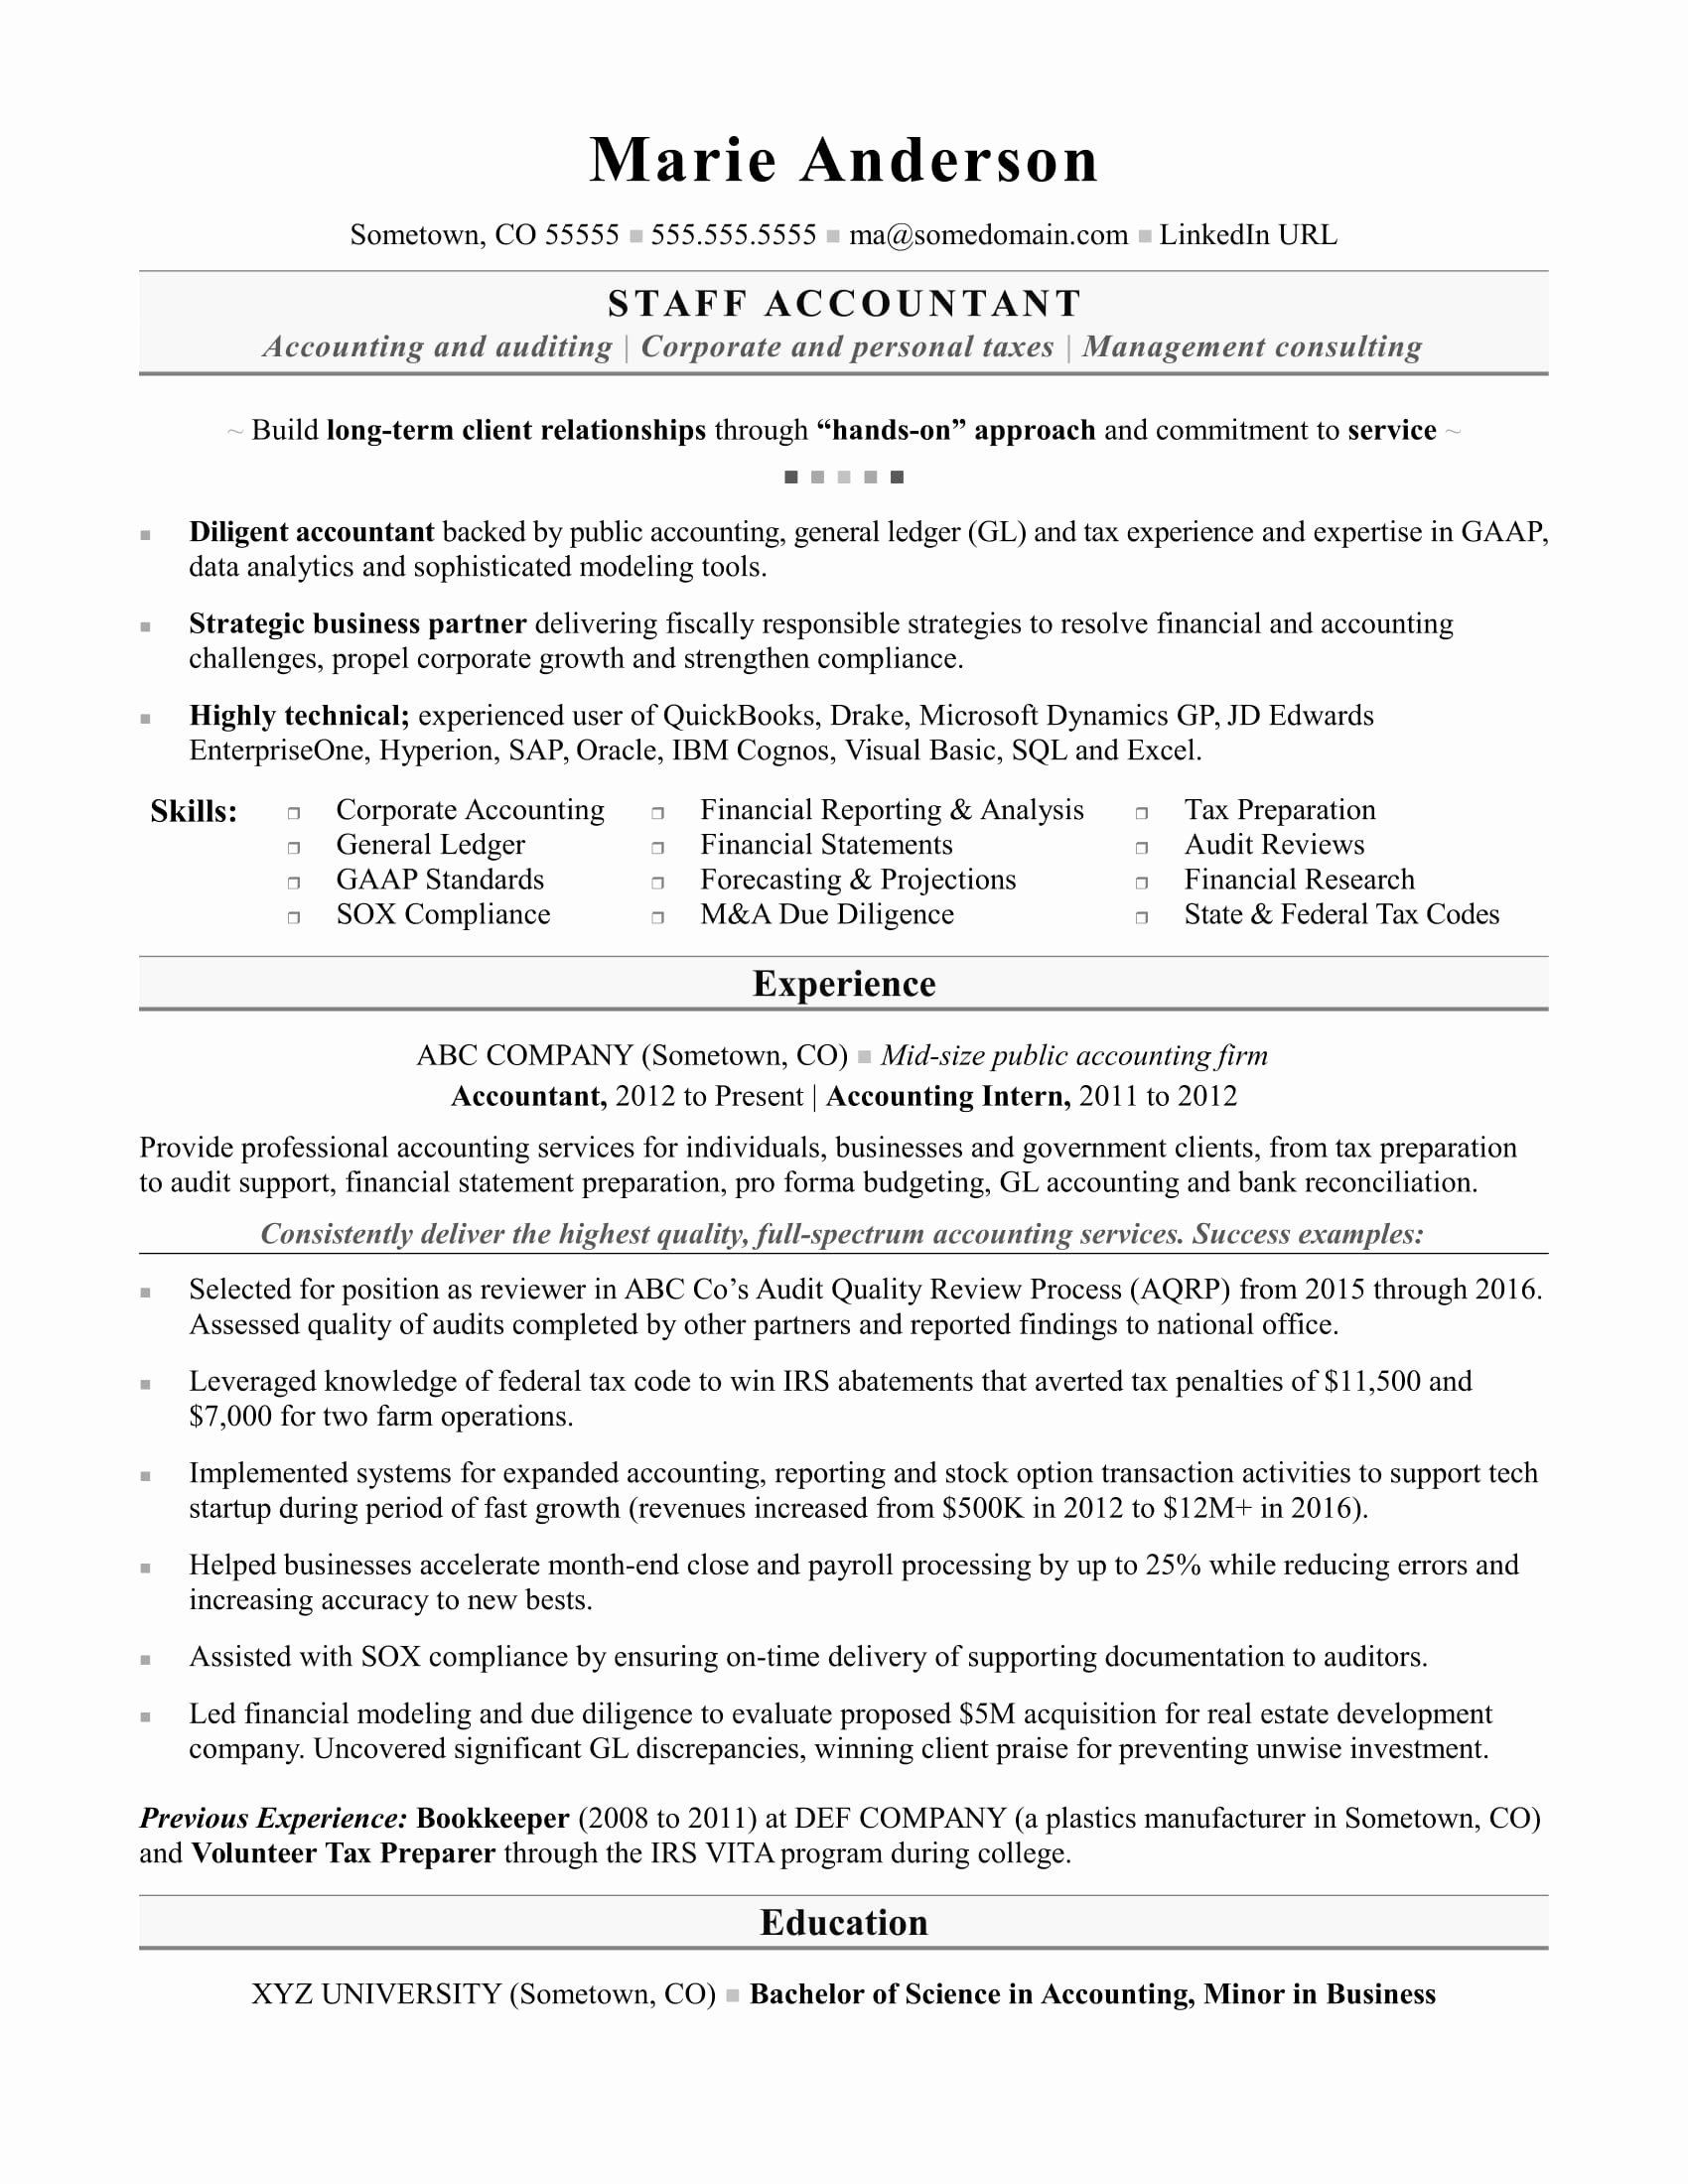 Sample Resume for Staff Accountant Position Staff Accountant Resume Examples Fresh Accounting Resume